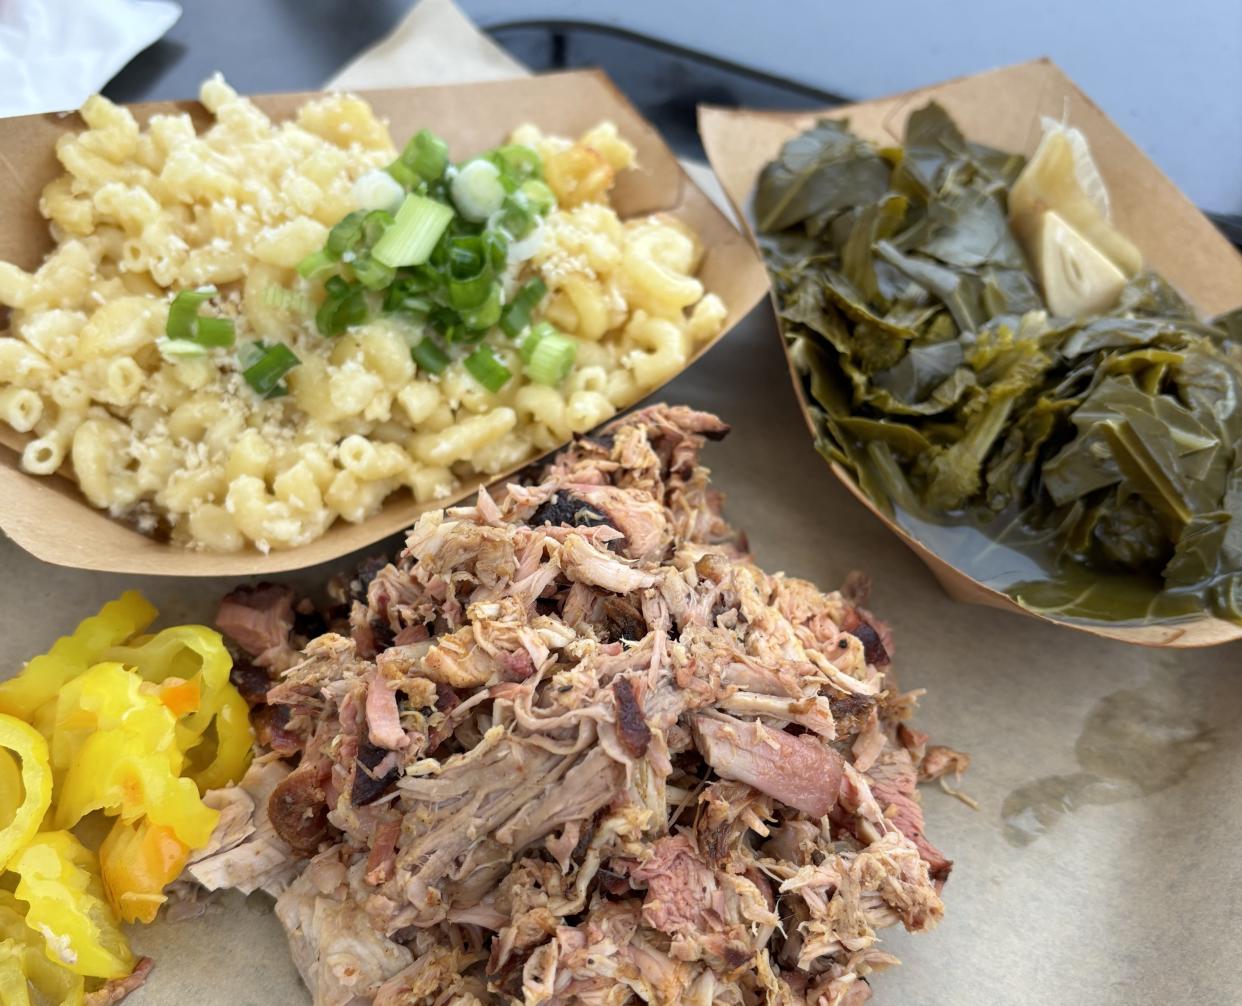 A plate of pork barbecue with mac and cheese and greens from Circle Pit BBQ at the Concept Kitchen Co.